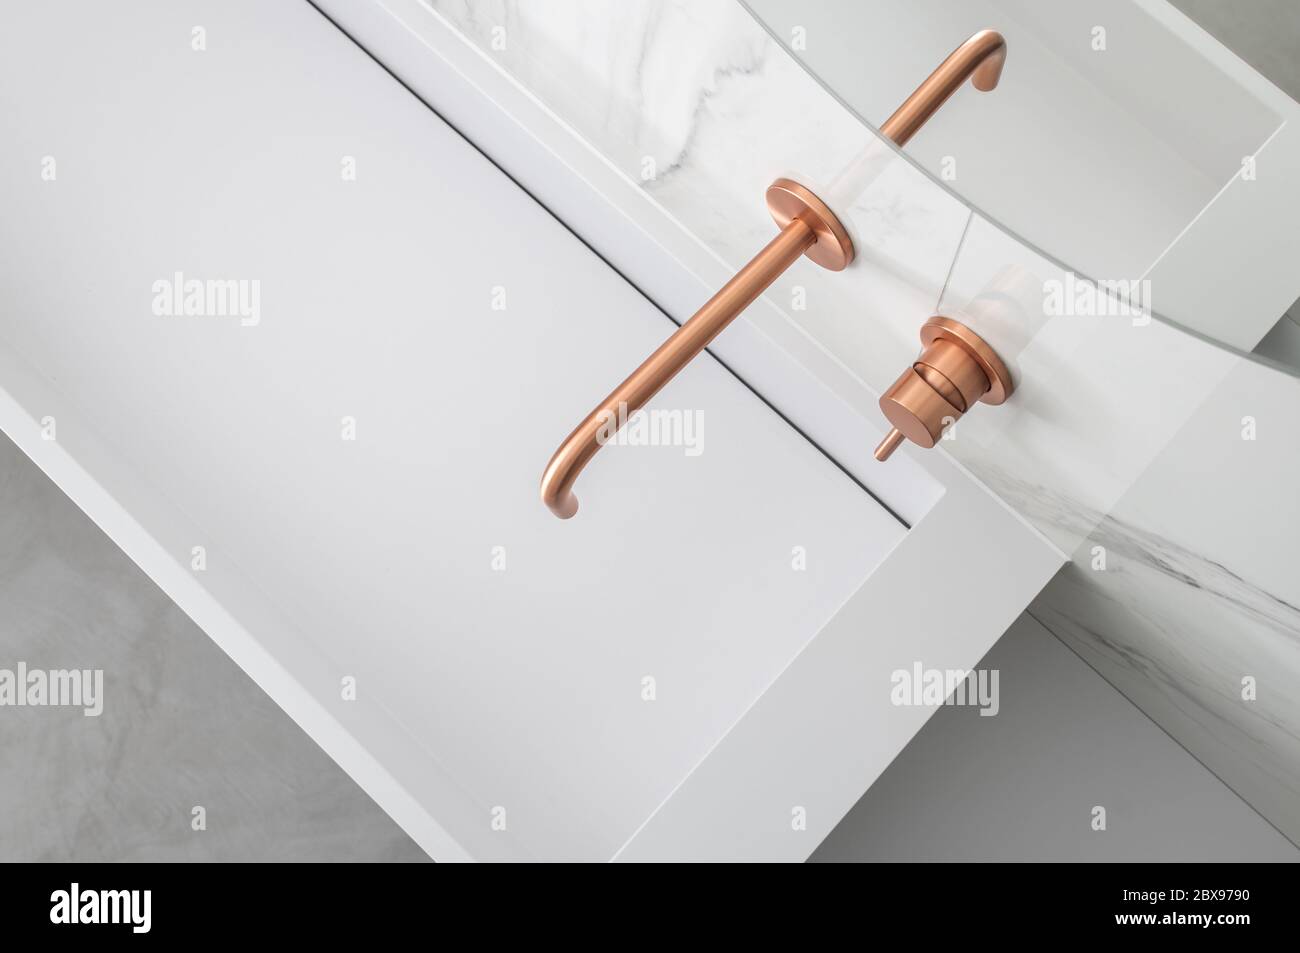 Elegant Rectangle White Bathroom Vessel Sink with Copper Color Faucet Stock Photo